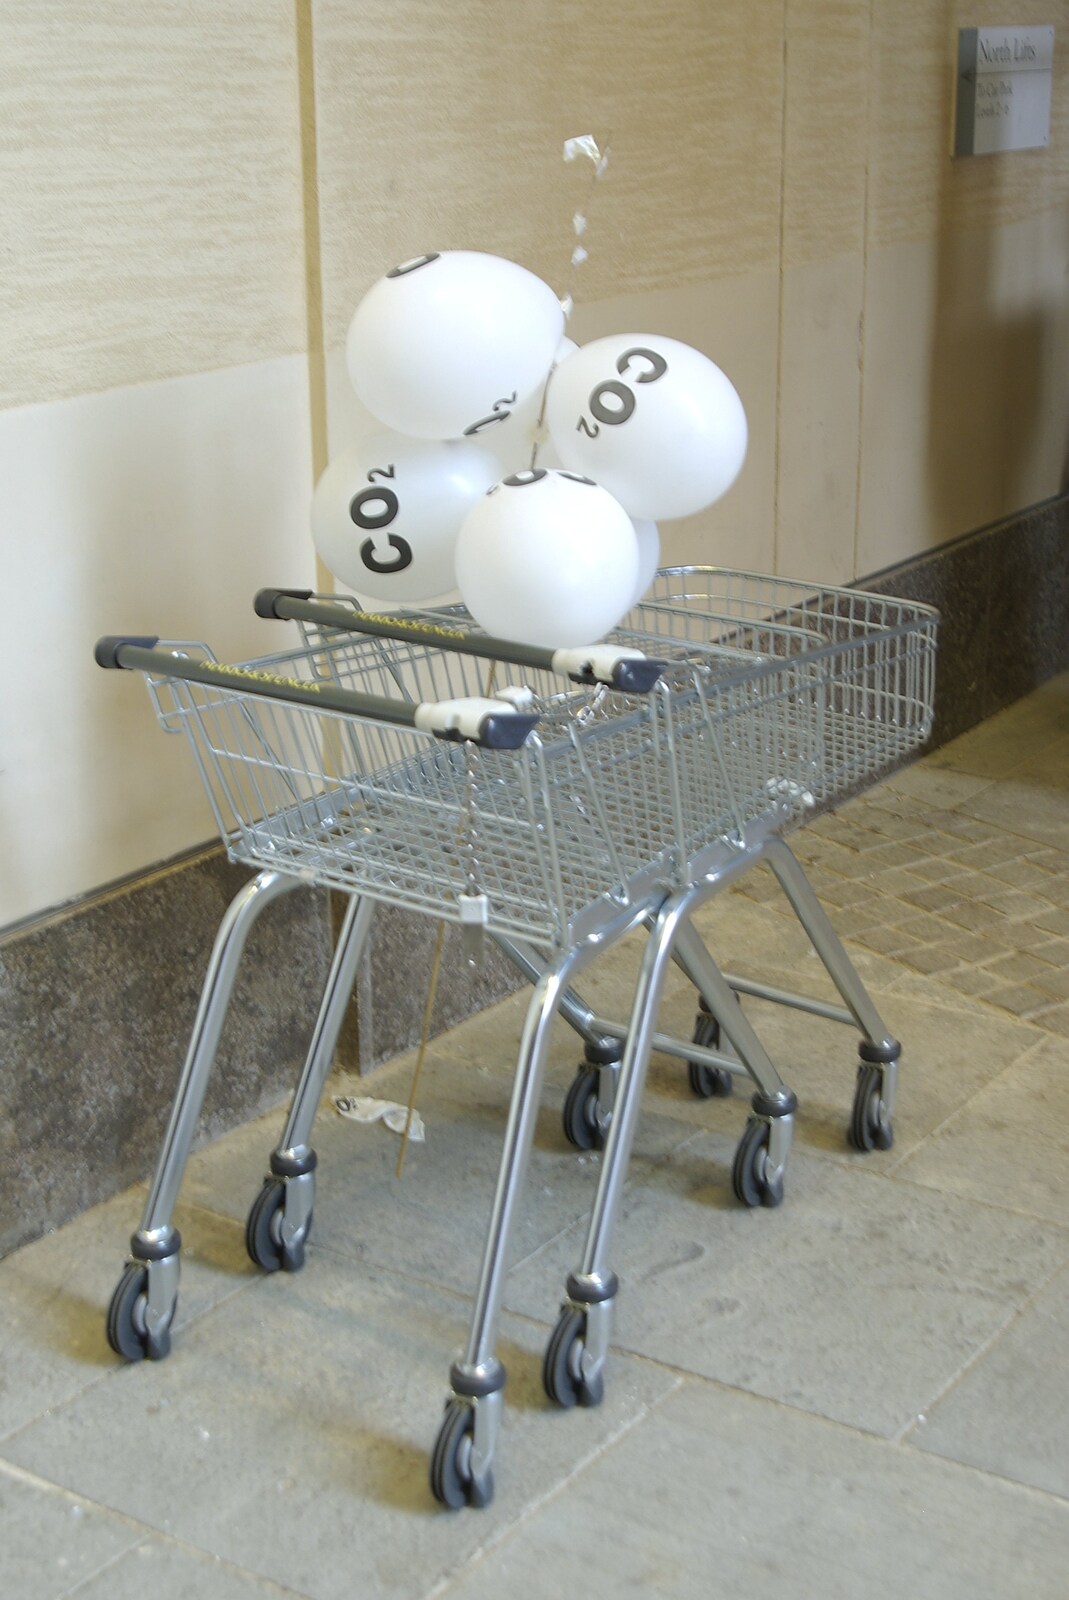 The BBs at the Carnegie Rooms, and a Mill Road Miscellany, Thetford and Cambridge - 22nd April 2008: In the Grand Arcade: abandoned trolleys with 'CO<sub>2</sub>' balloons